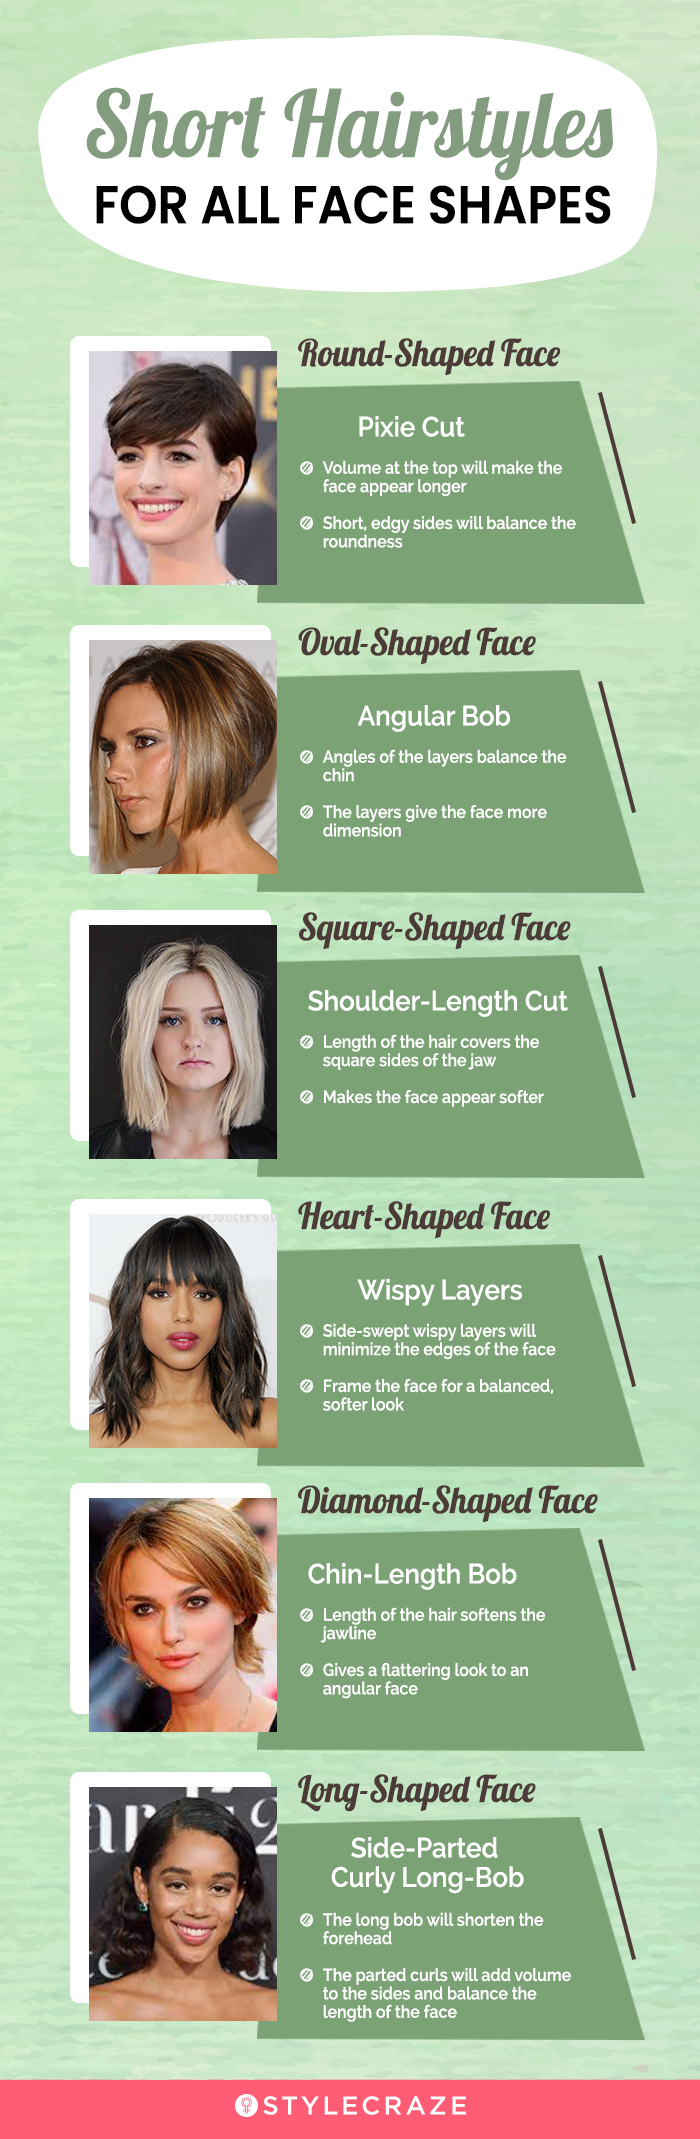 short hairstyles for all face shapes [infographic] 